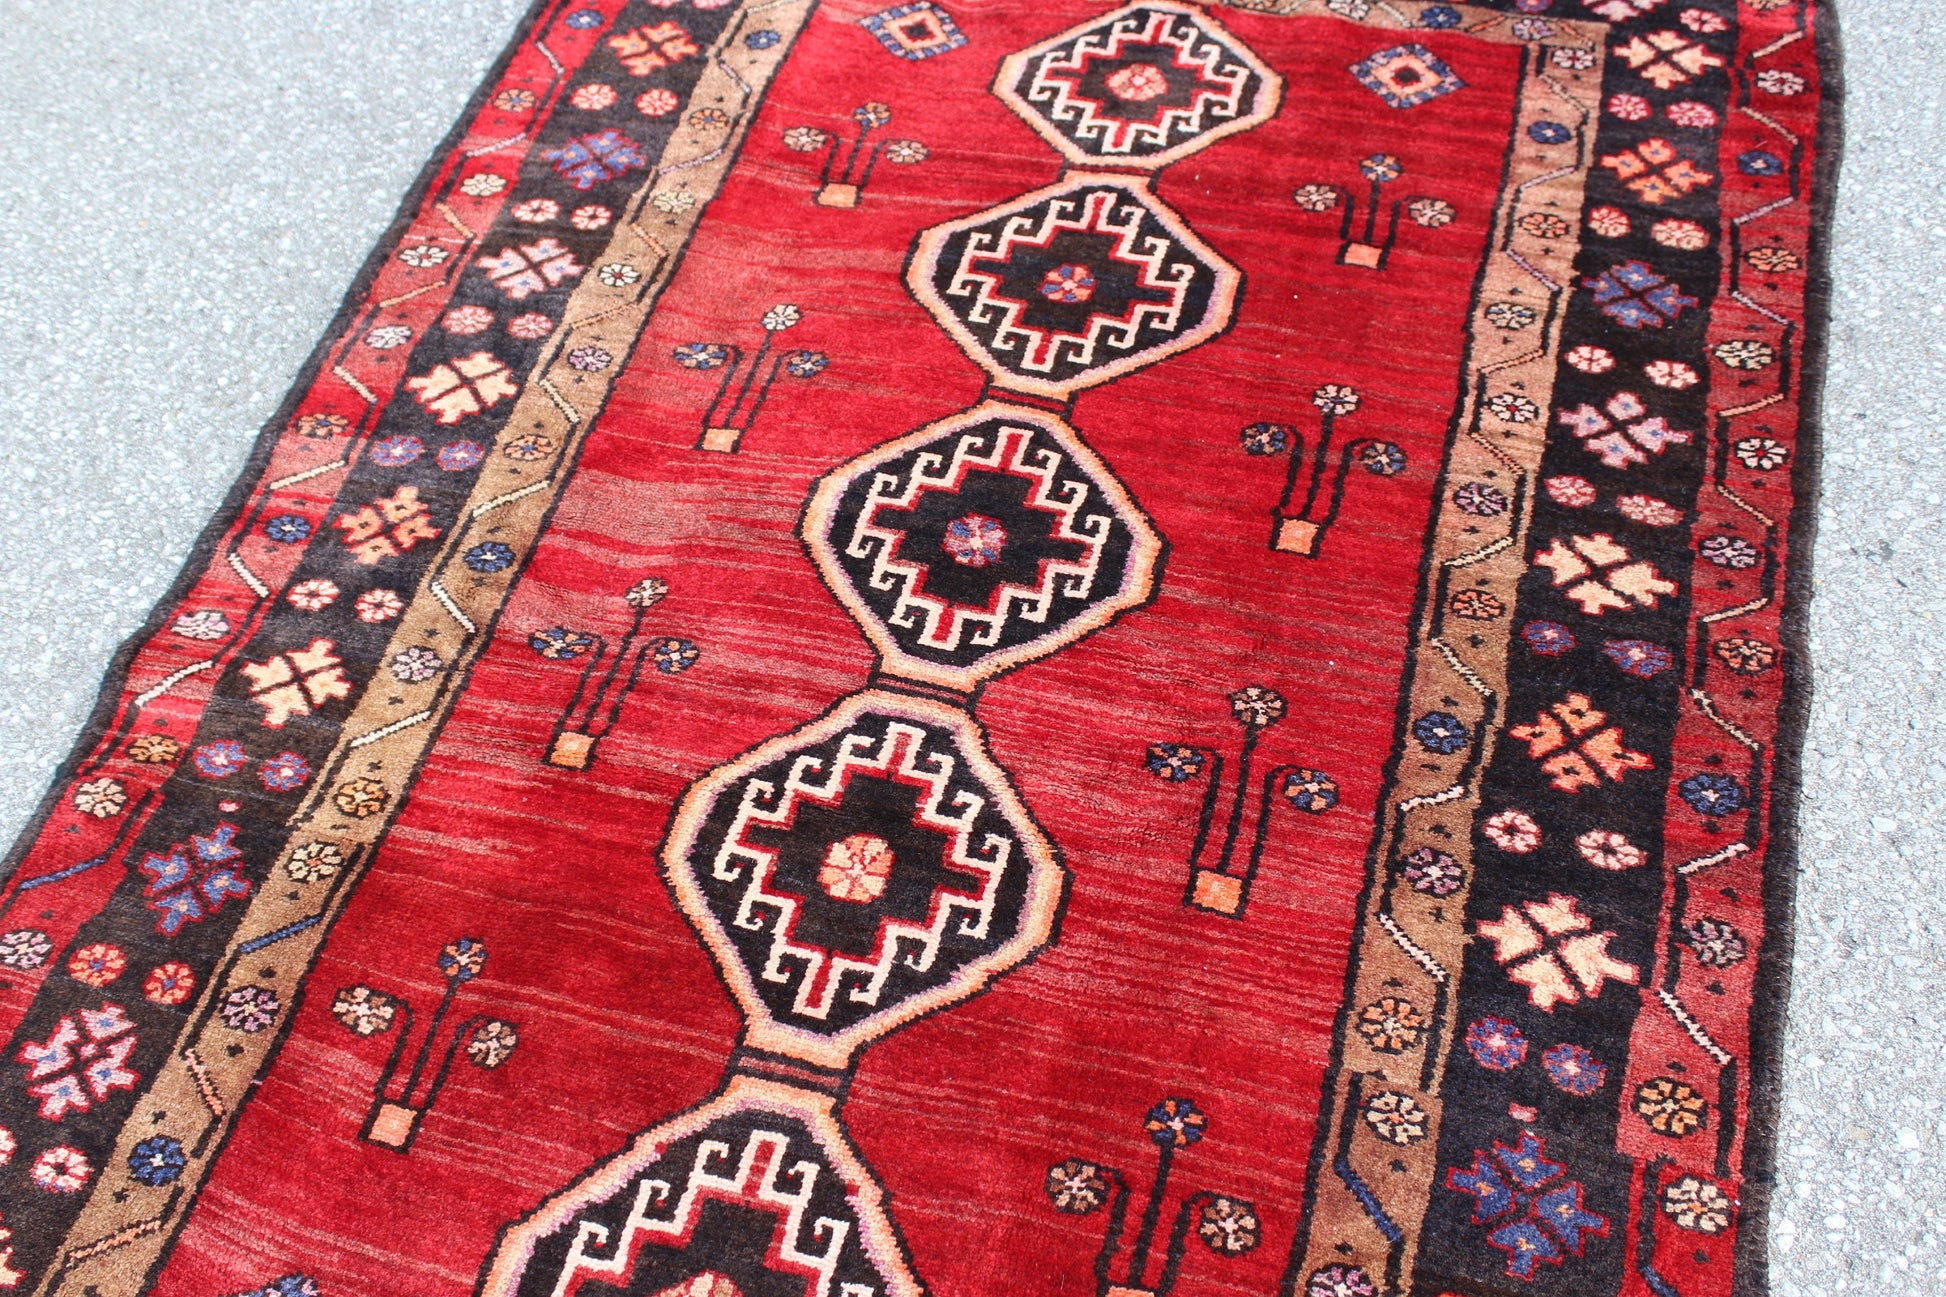 Red 4x6 Hand Knotted Turkish Rug with Navy Blue Border